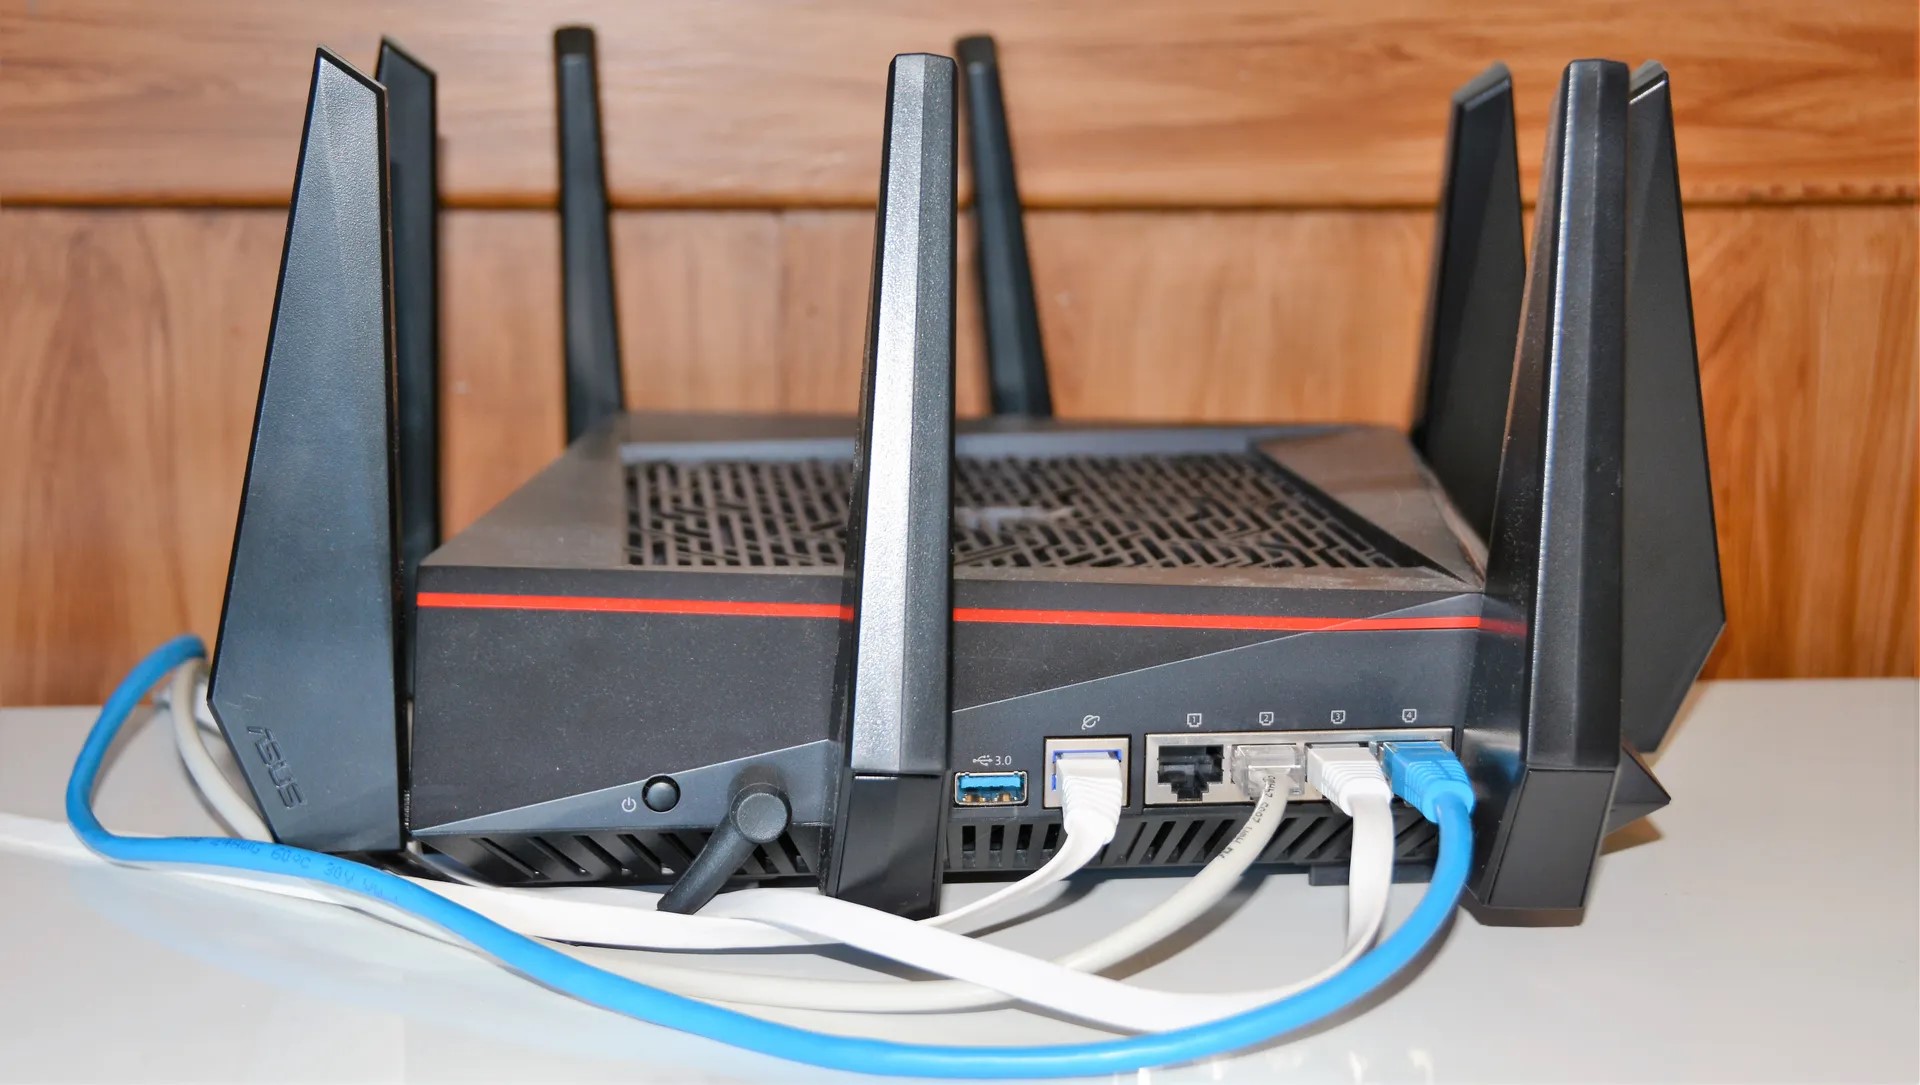 How To Turn Off My Wi-Fi Router